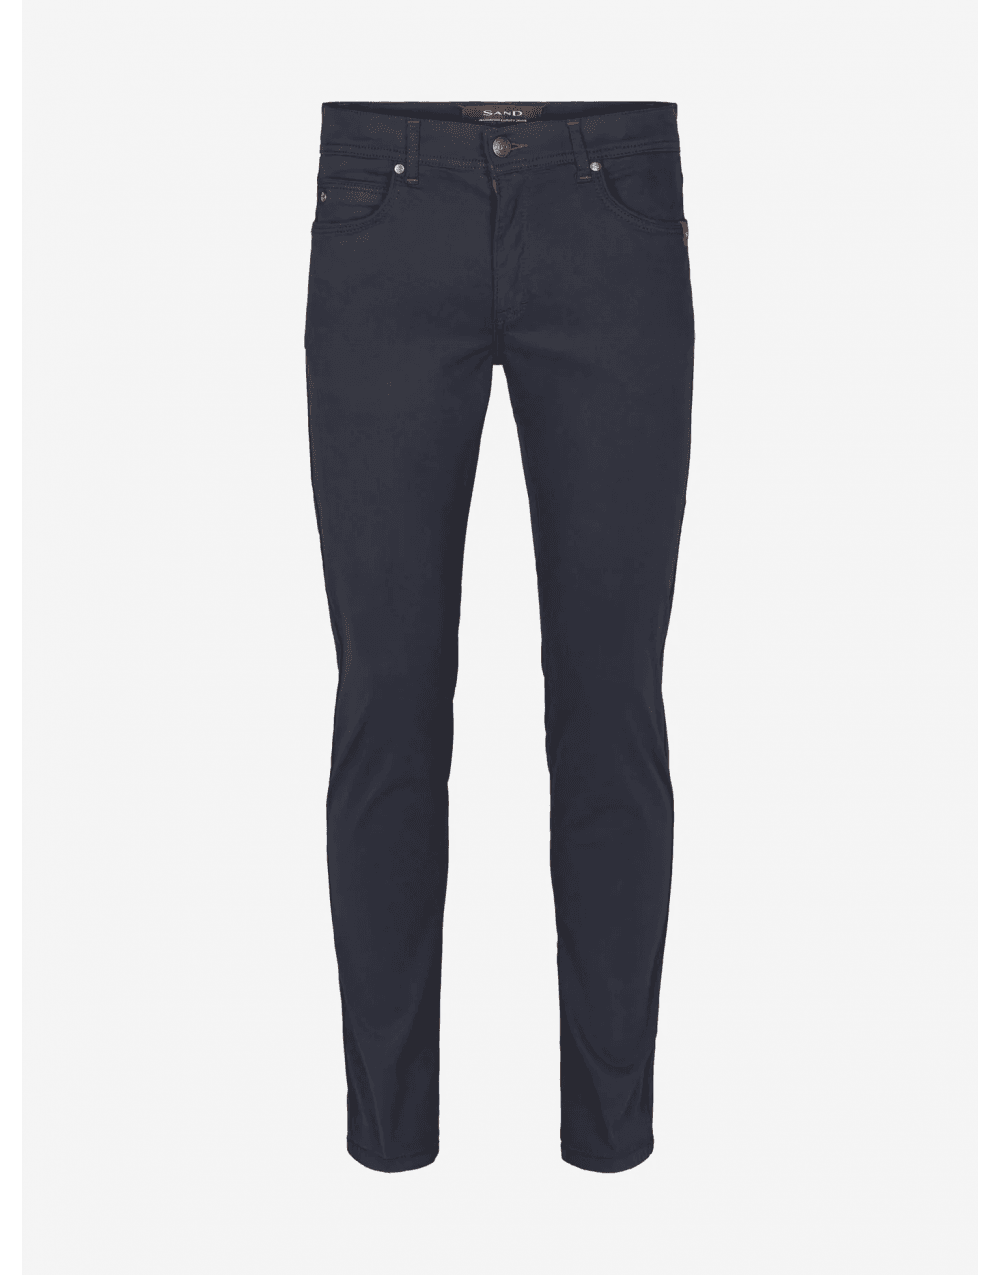 SAND Navy Suede Touch Burton Trousers 